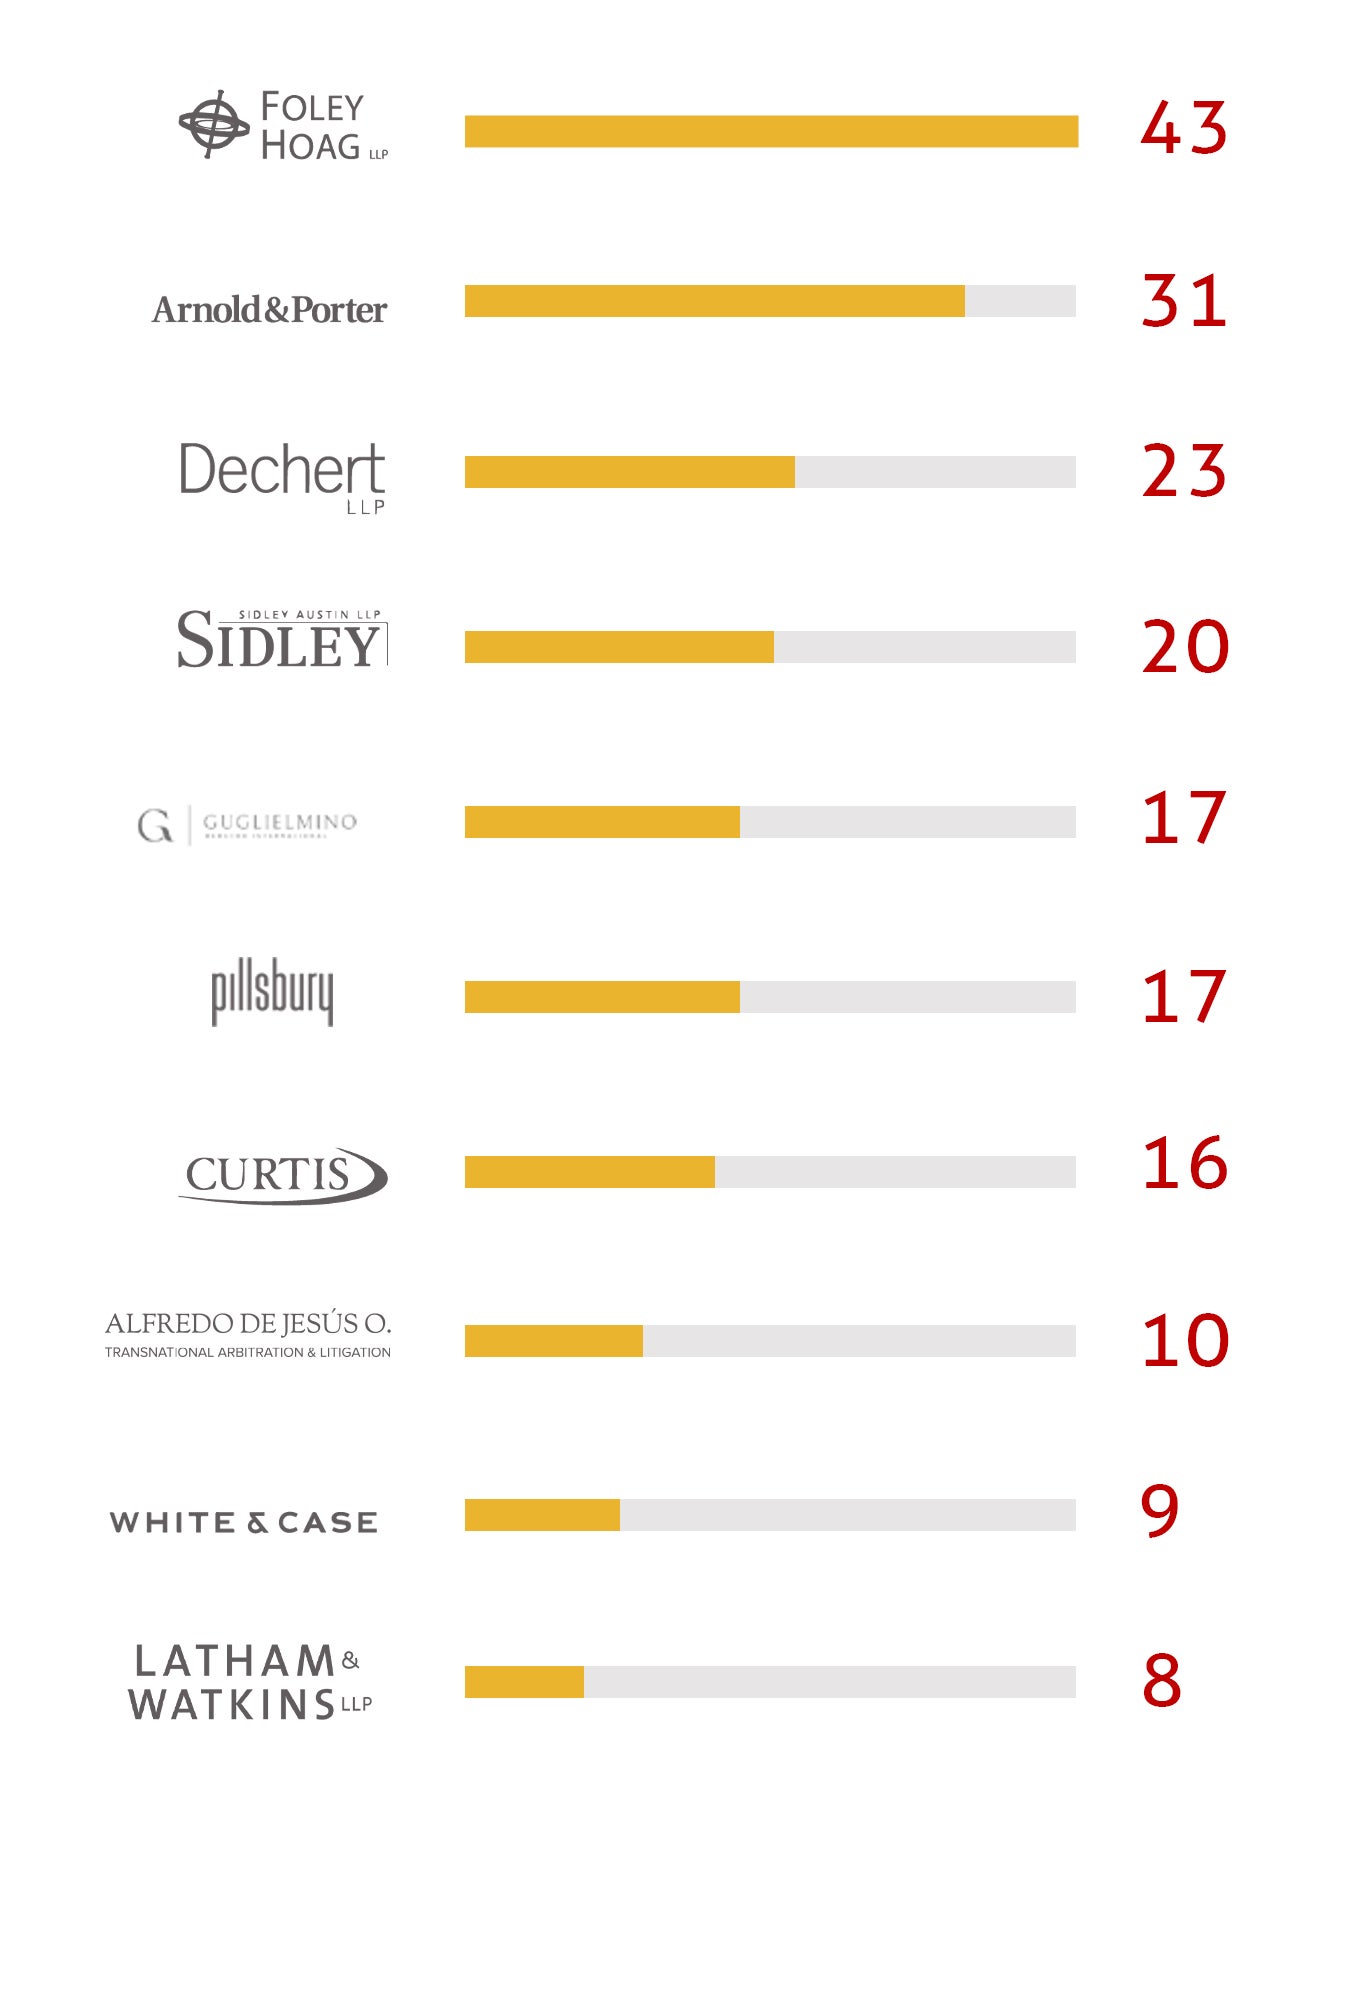 Chart of the top 10 law firms hired by states in Latin America and the Caribbean